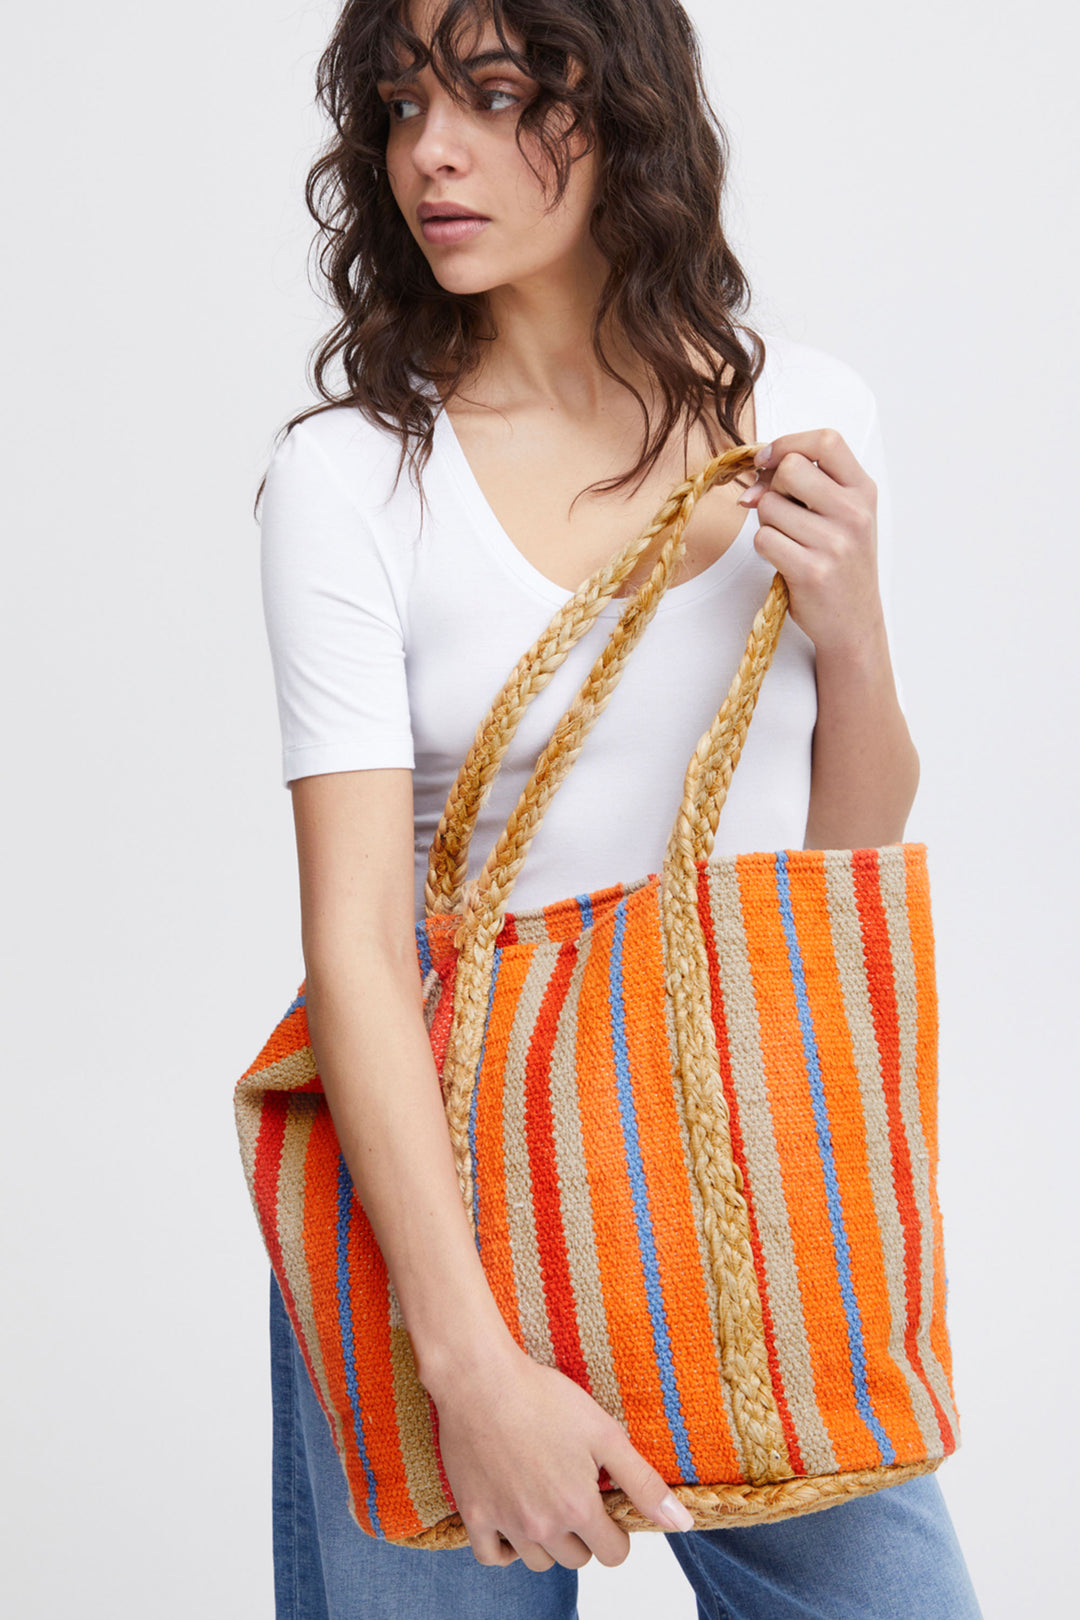 Ichi Summer 2024 The Stripe Tote Bag is an all-natural jute basket bag that is perfect for the season!